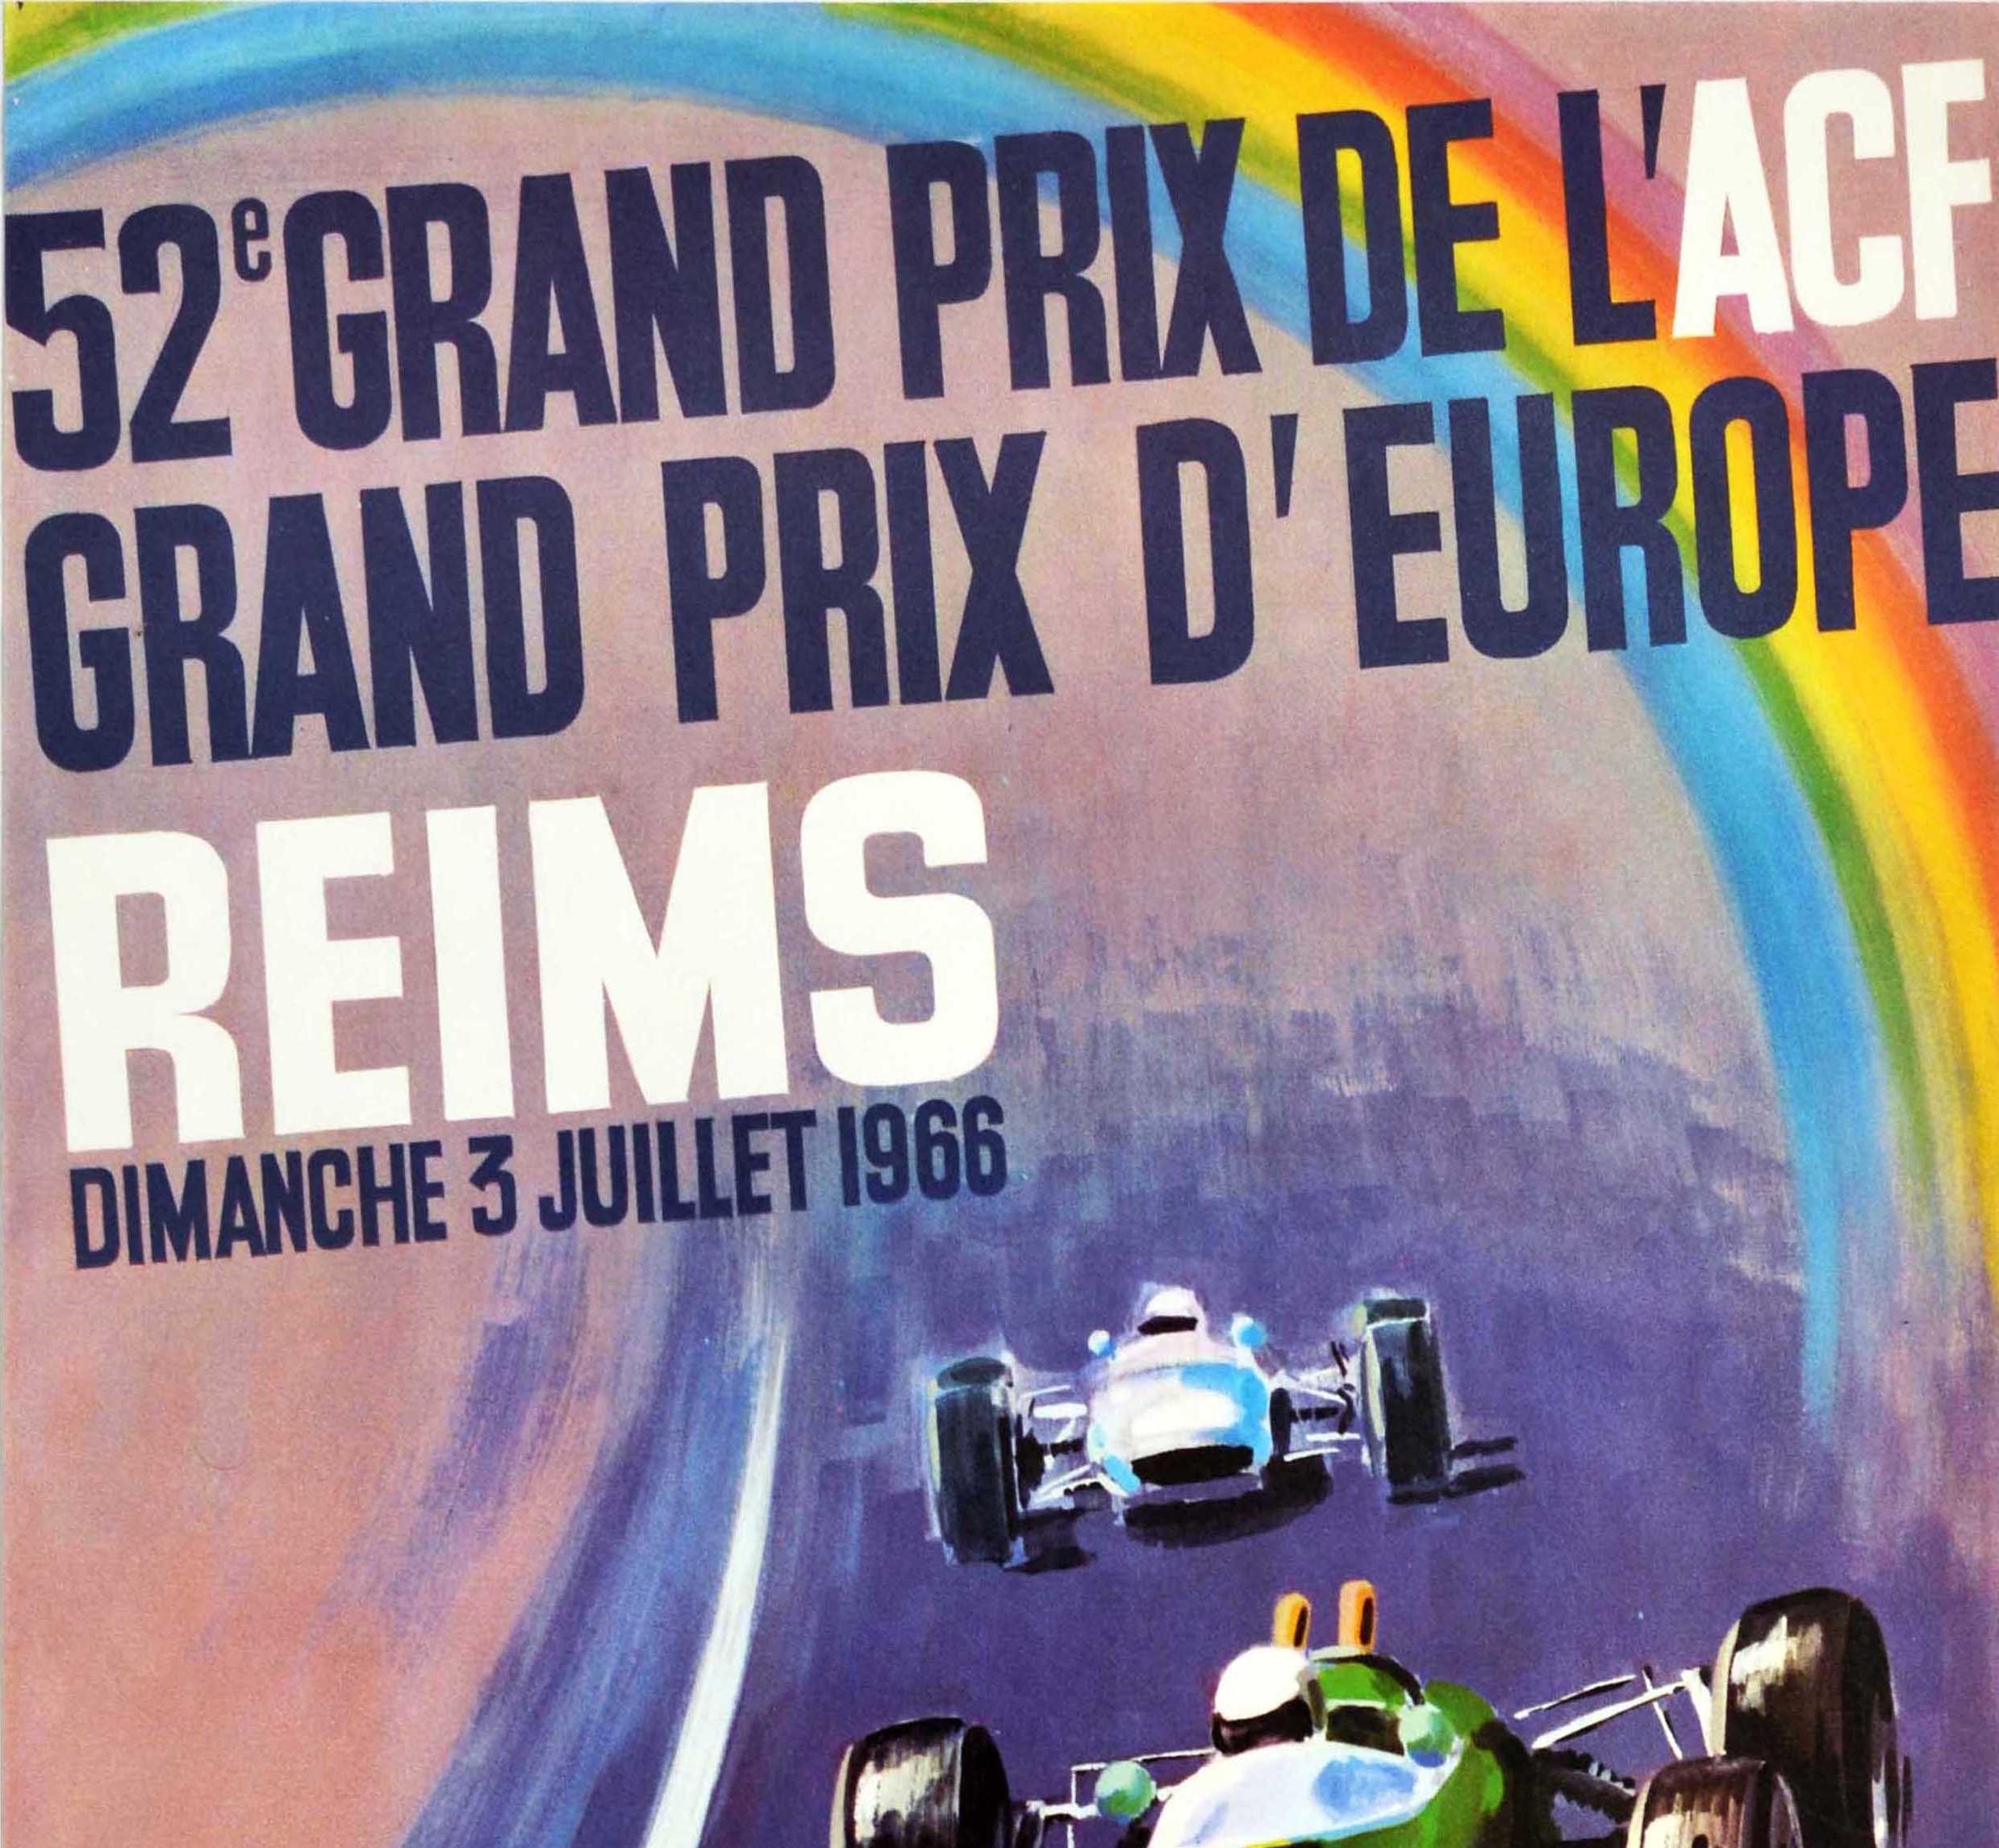 Original vintage Formula 1 auto racing poster for the 52nd ACF Grand Prix European Grand Prix Reims on Sunday 3 July 1966 - 52 Grand Prix De L'ACF Grand Prix D'Europe Reims Dimanche 3 Juillet 1966 - featuring a dynamic illustration by Michel